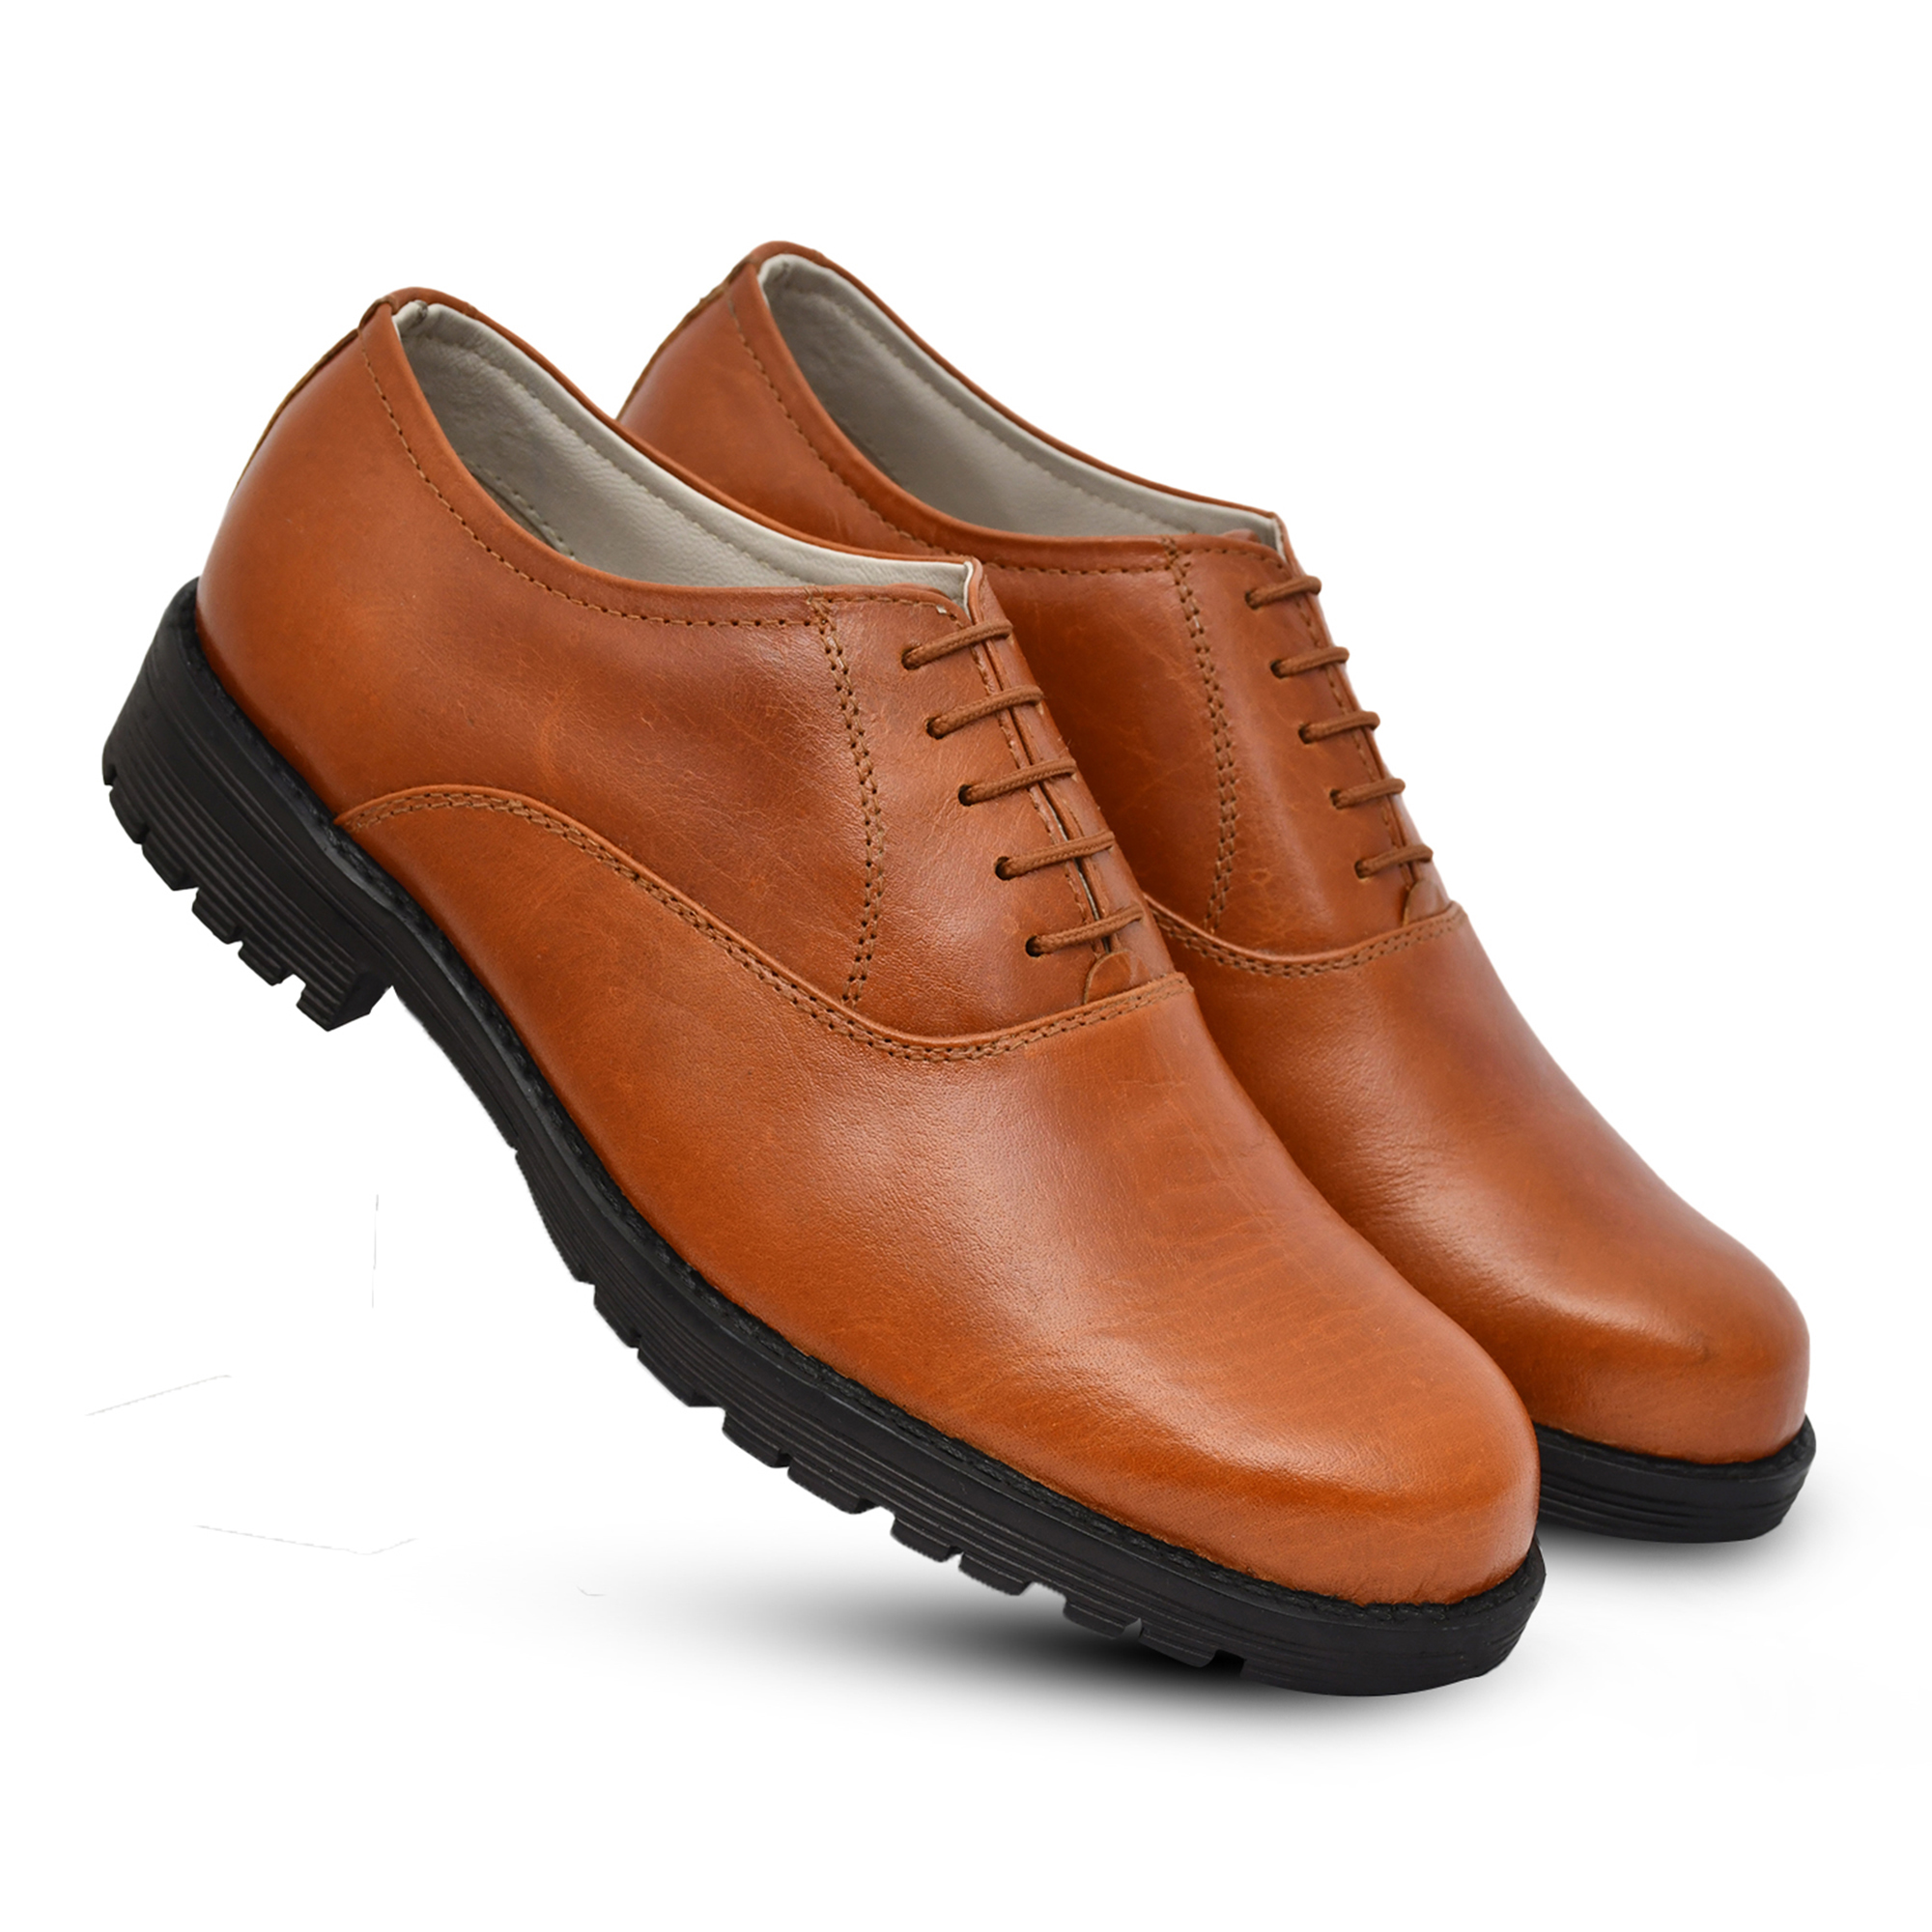 ASM Safety Shoes: Buy Safety Formal Wine Leather Derby Shoes Online.